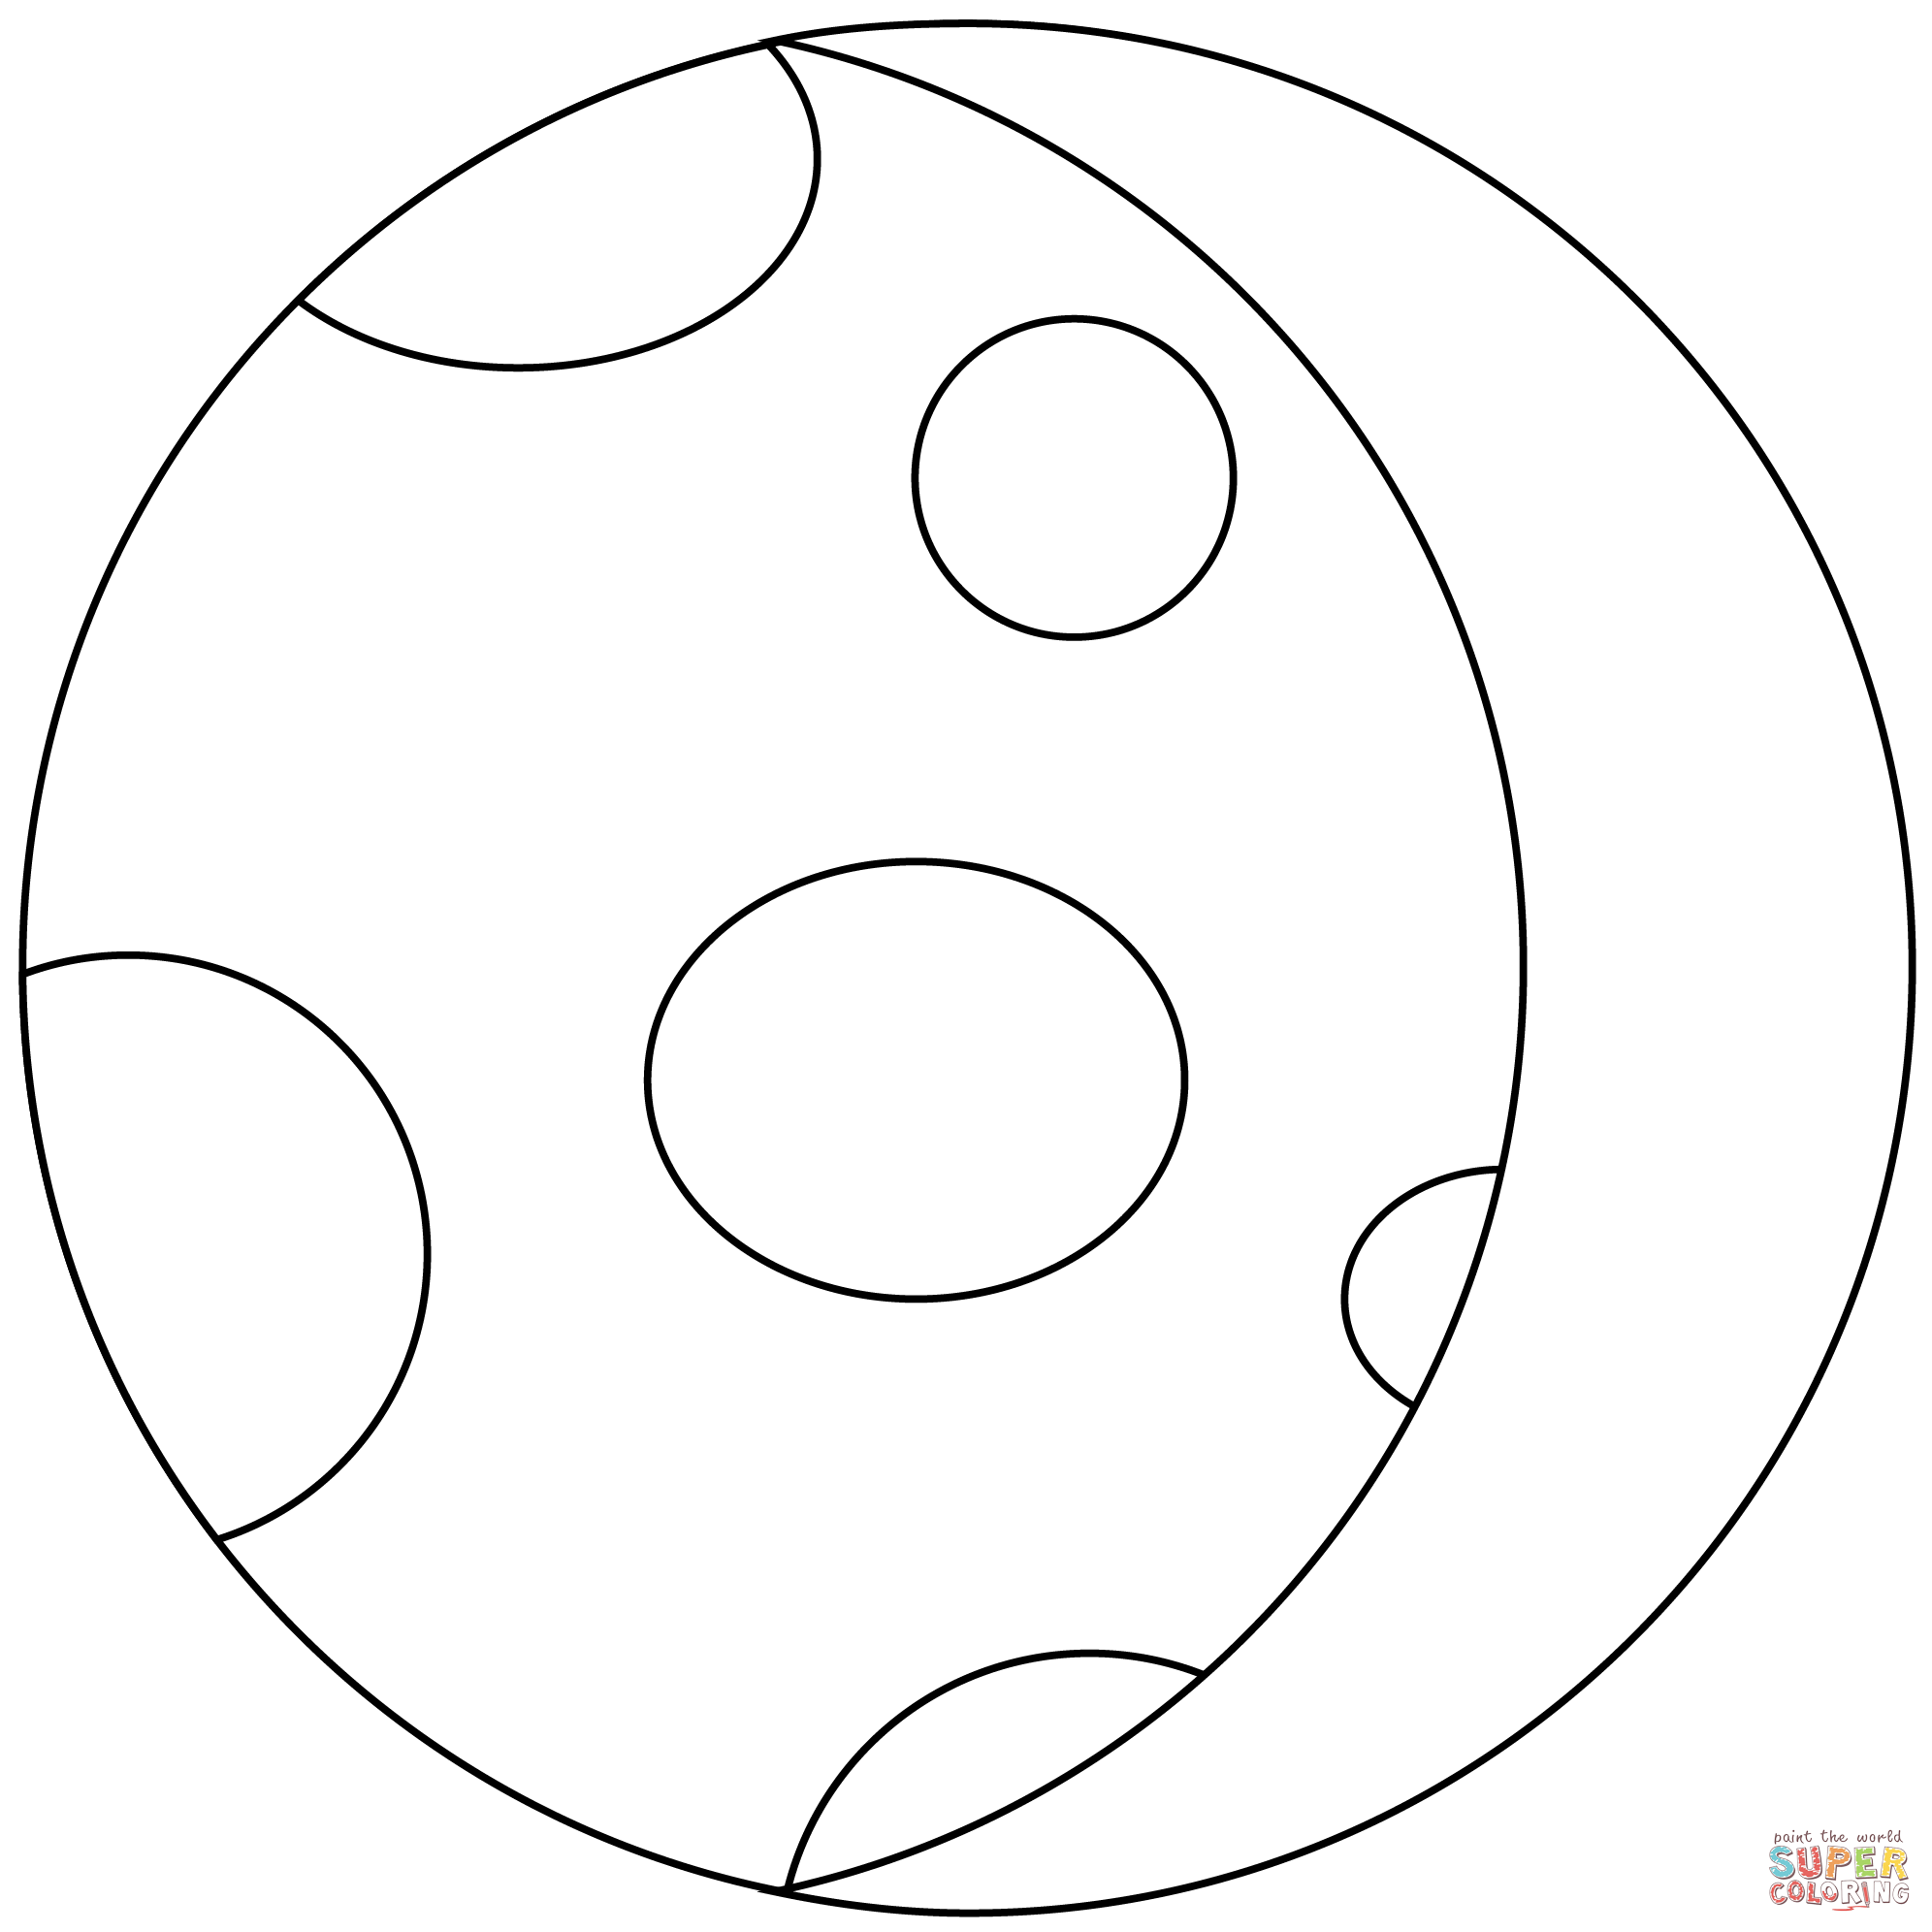 Waxing crescent moon emoji coloring page free printable coloring pages